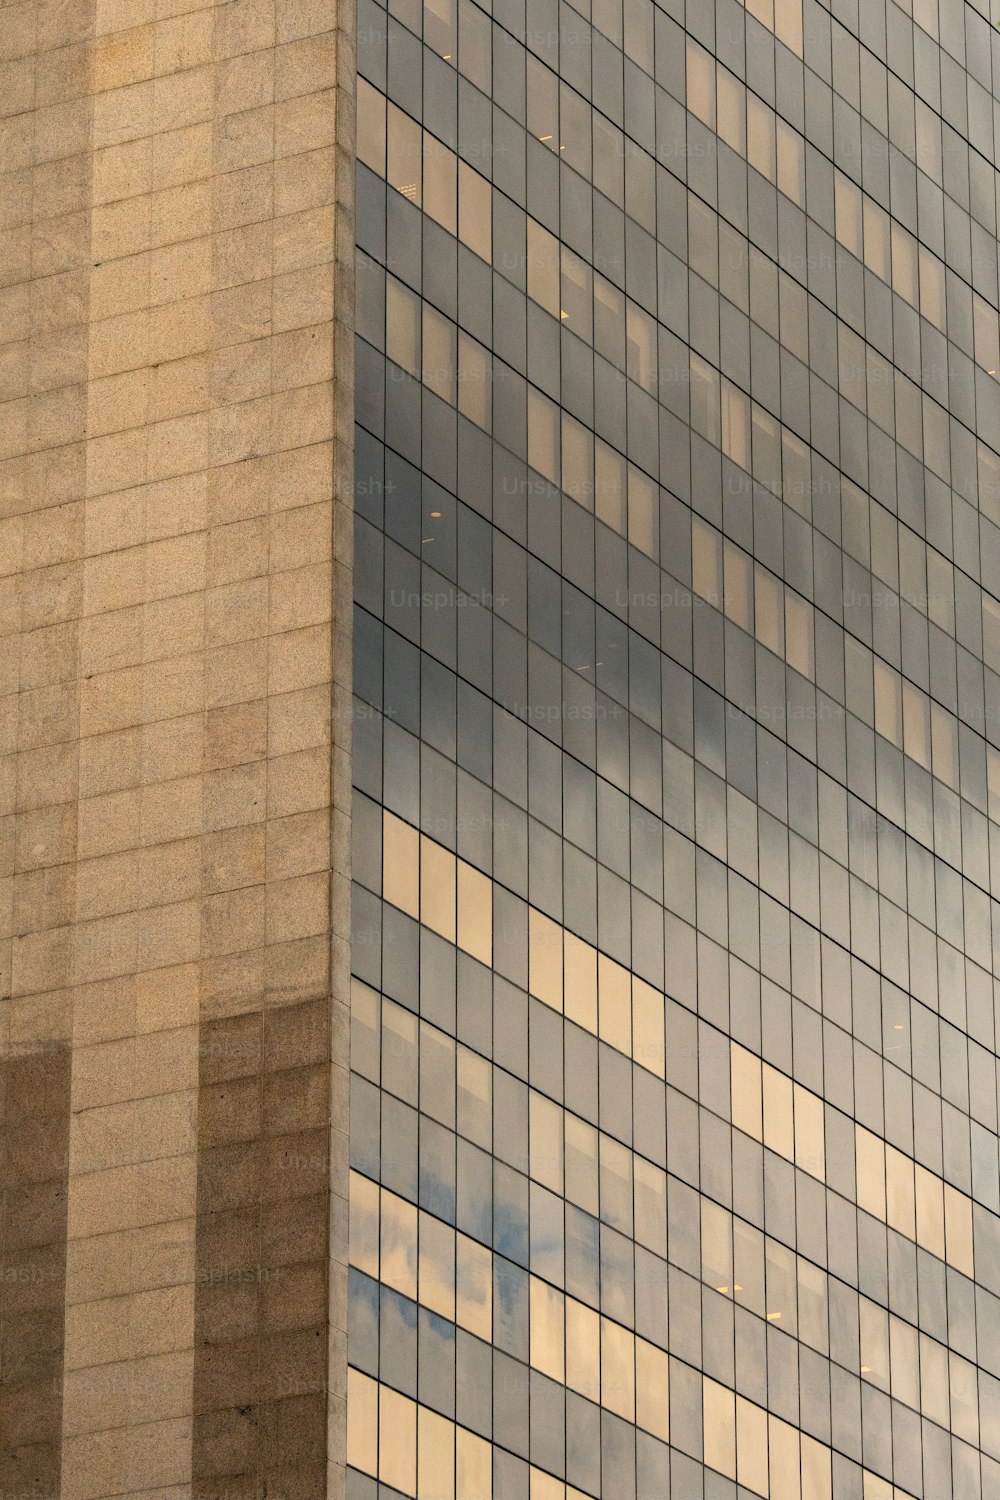 a plane flying in front of a very tall building